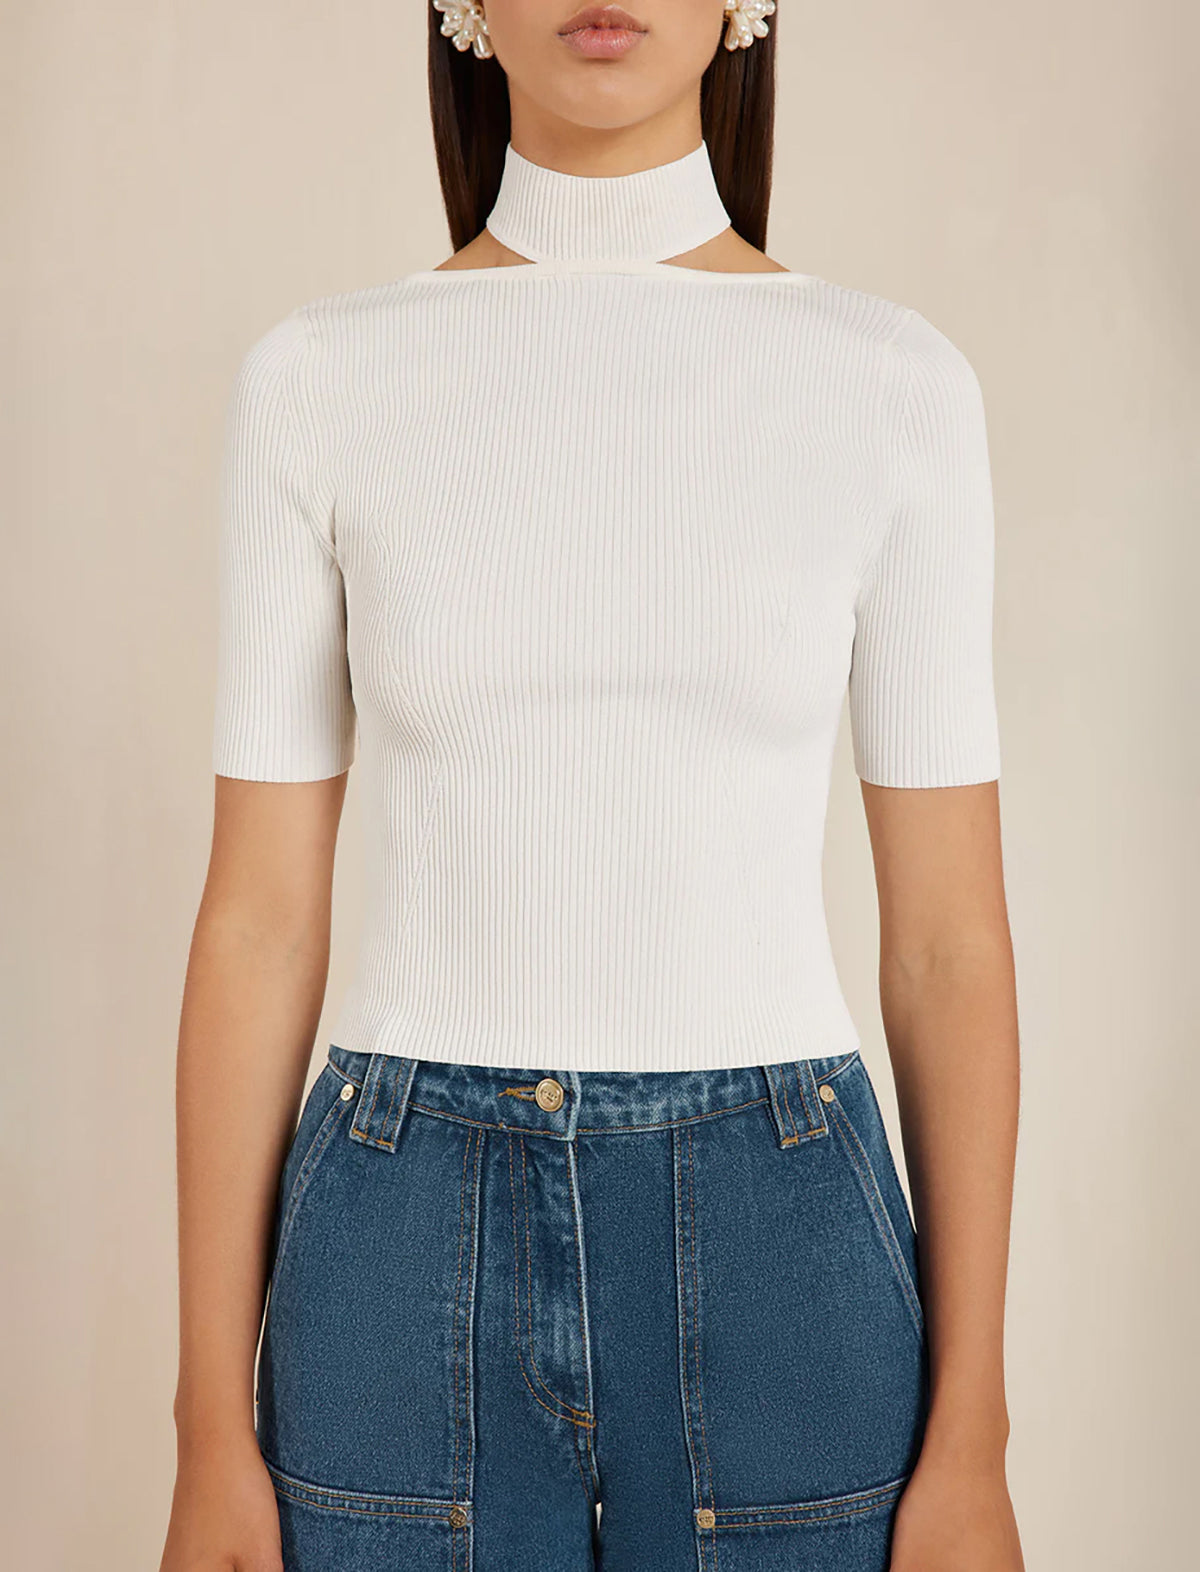 CULT GAIA Brianna Ribbed Knit Top in Off White